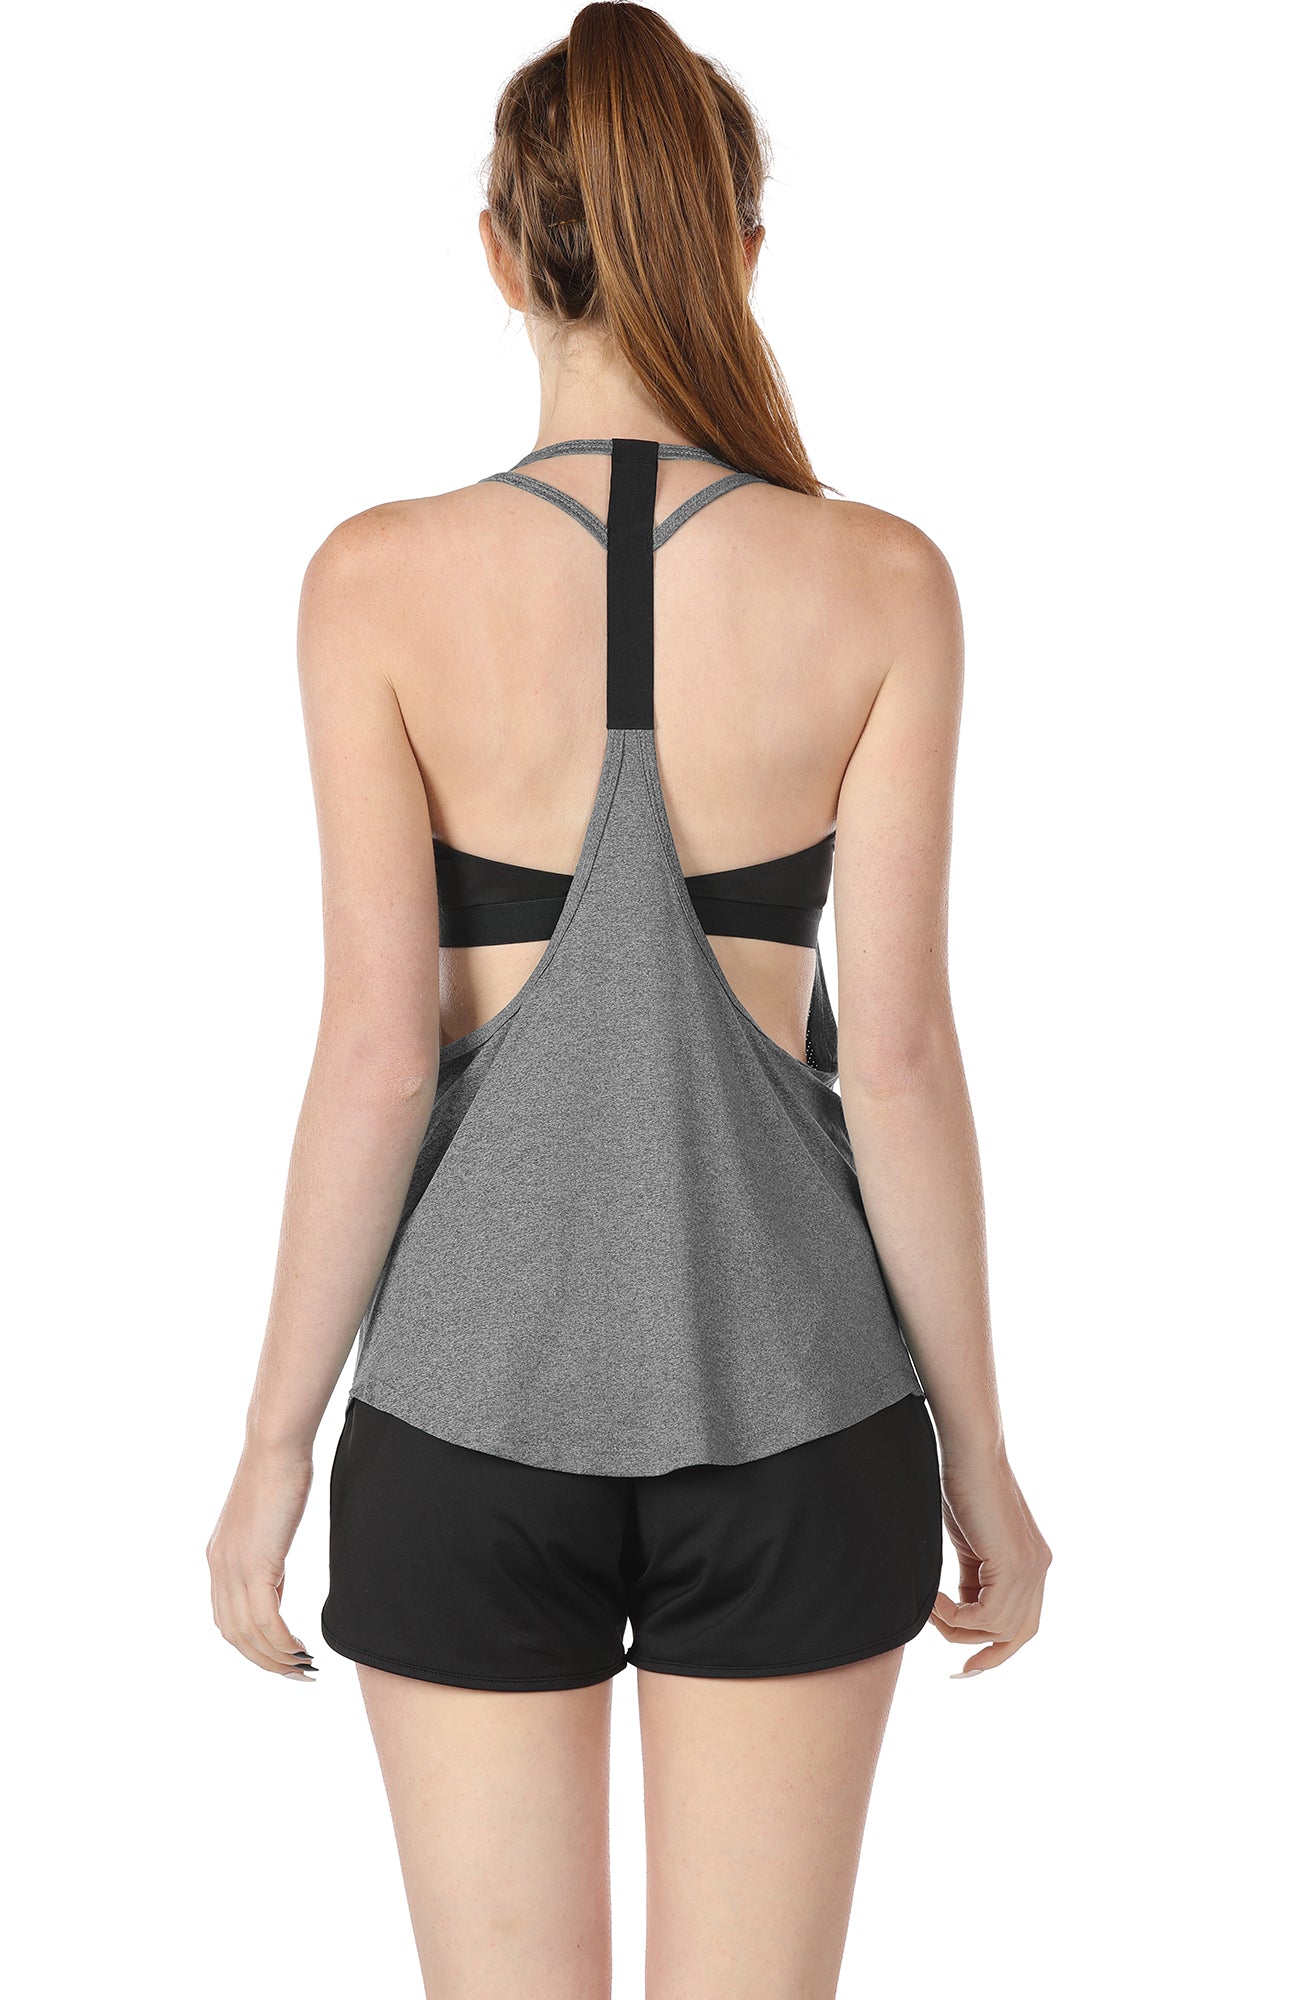 TK1A icyzone Workout Tank Tops Built in Bra - Women's Strappy Athletic Yoga  Tops, Exercise Running Gym Shirts